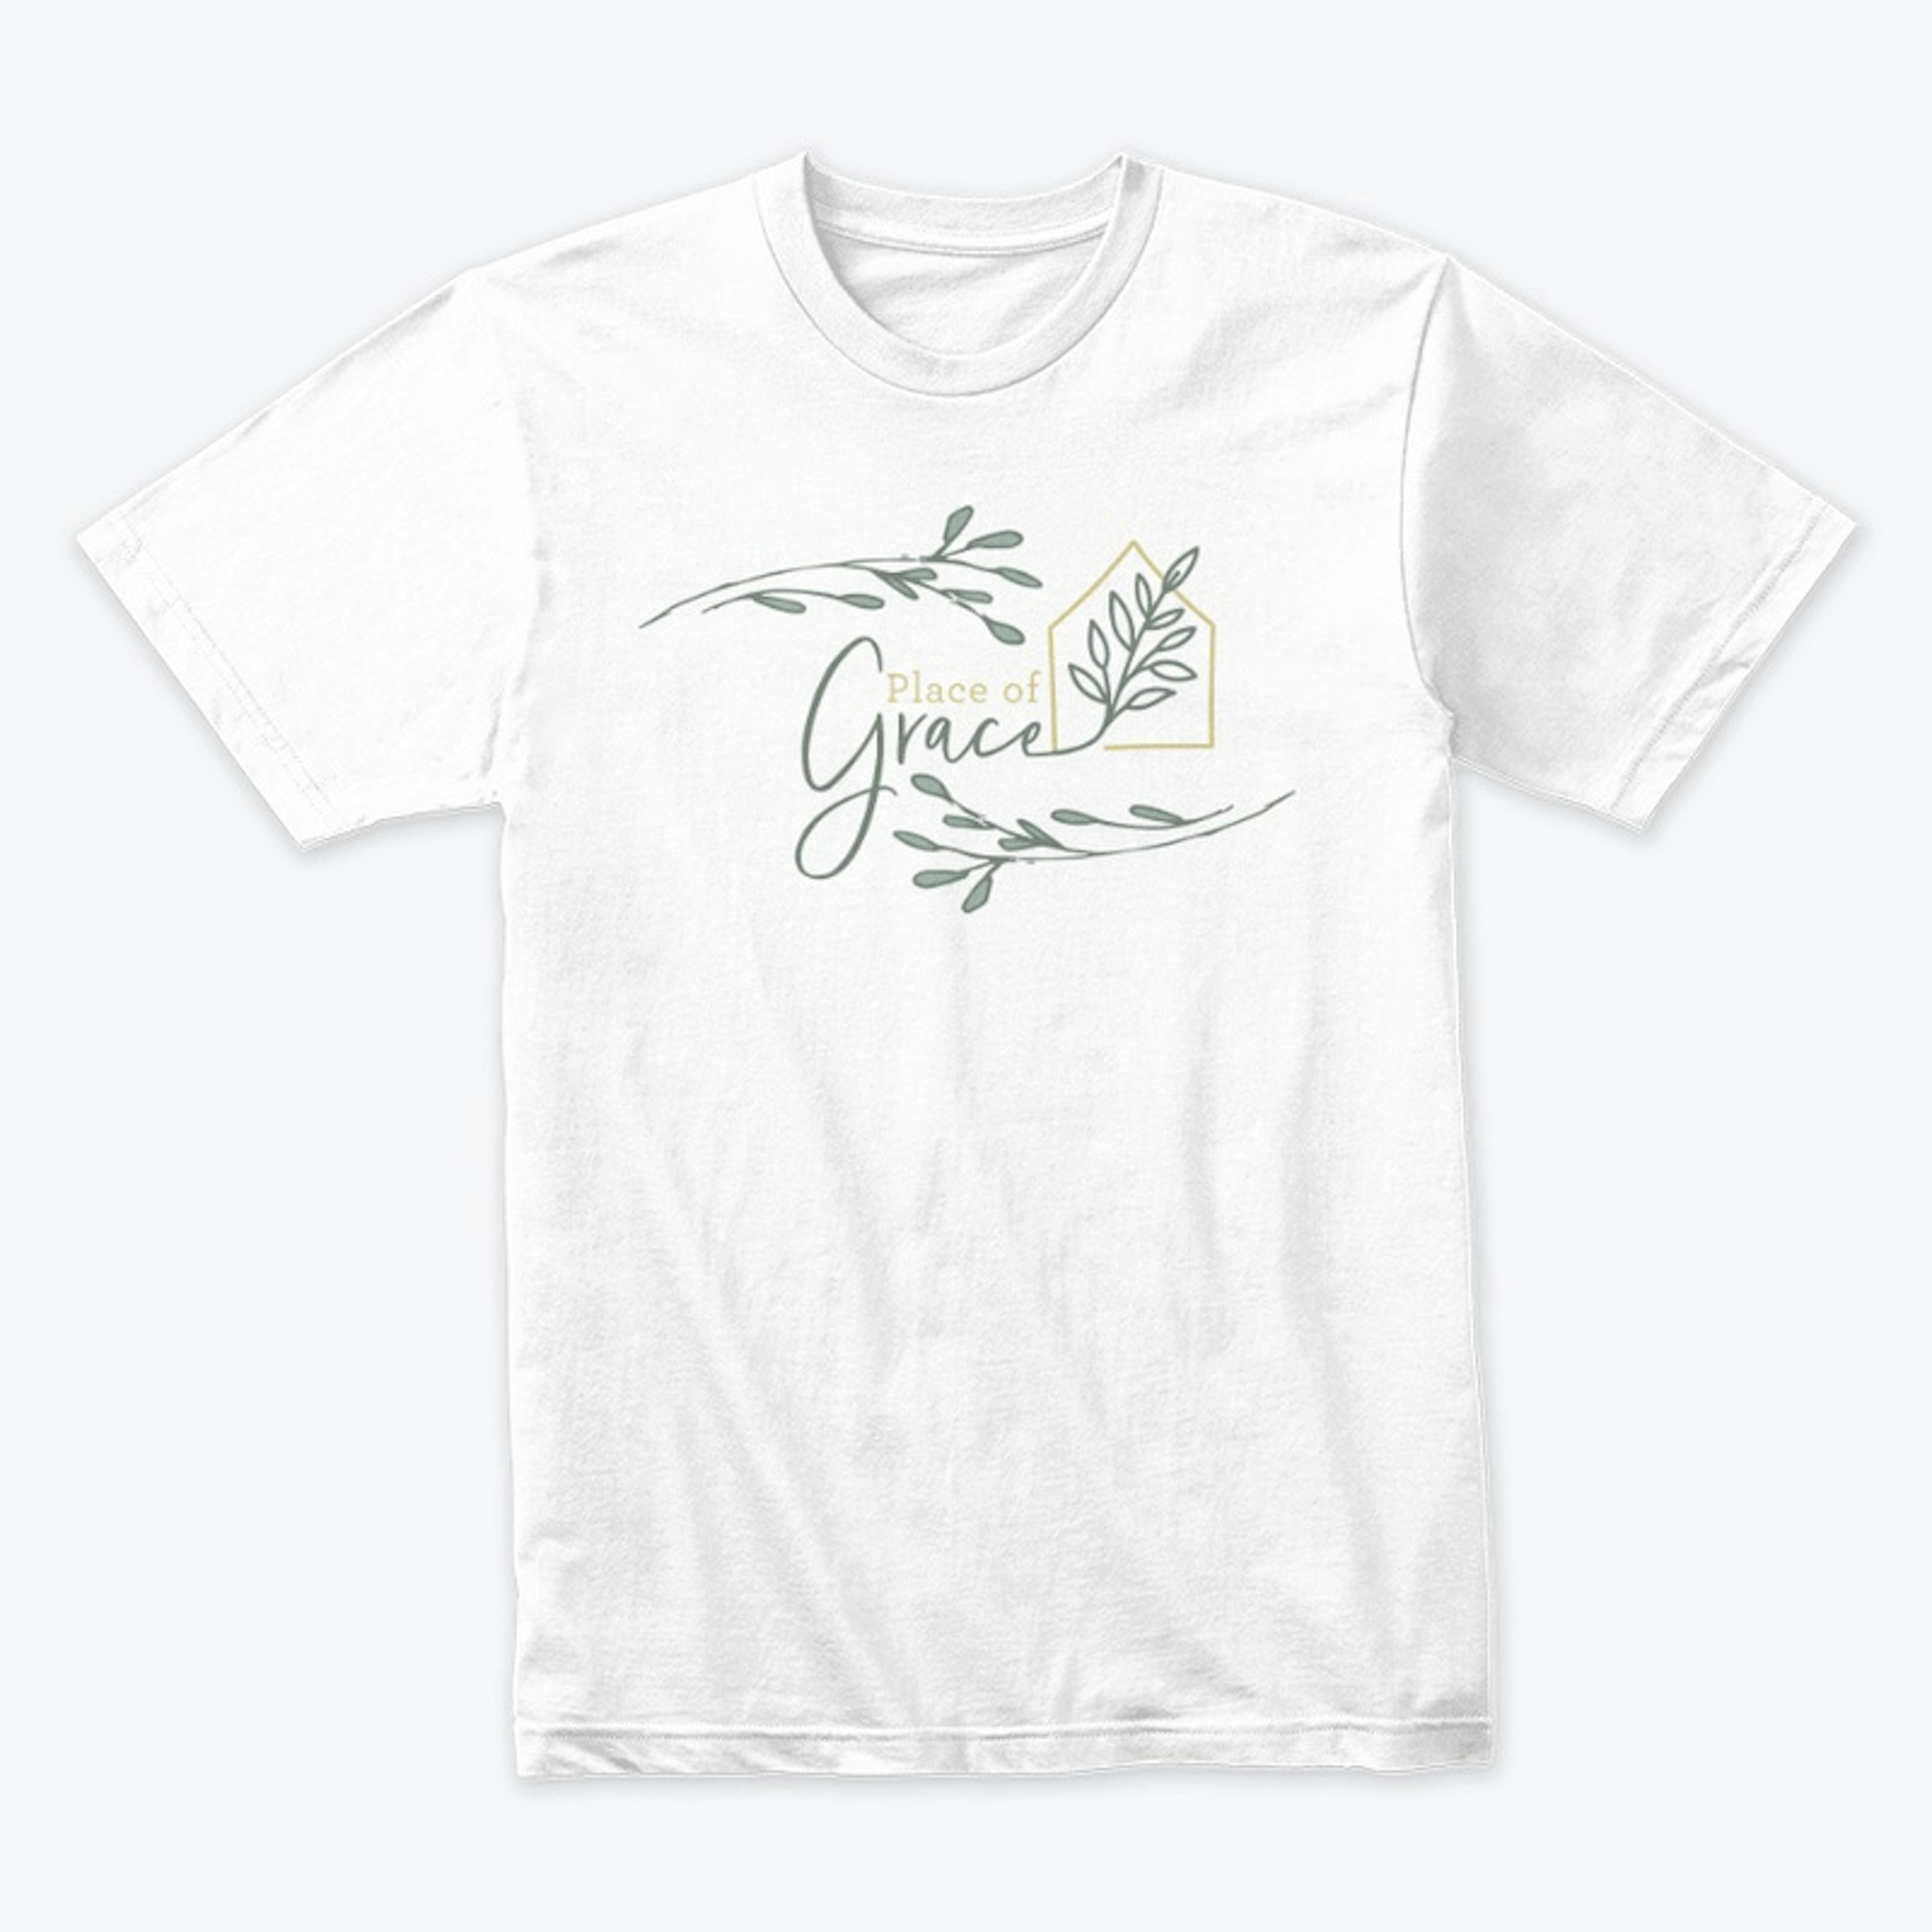 Place of Grace Logo Tee